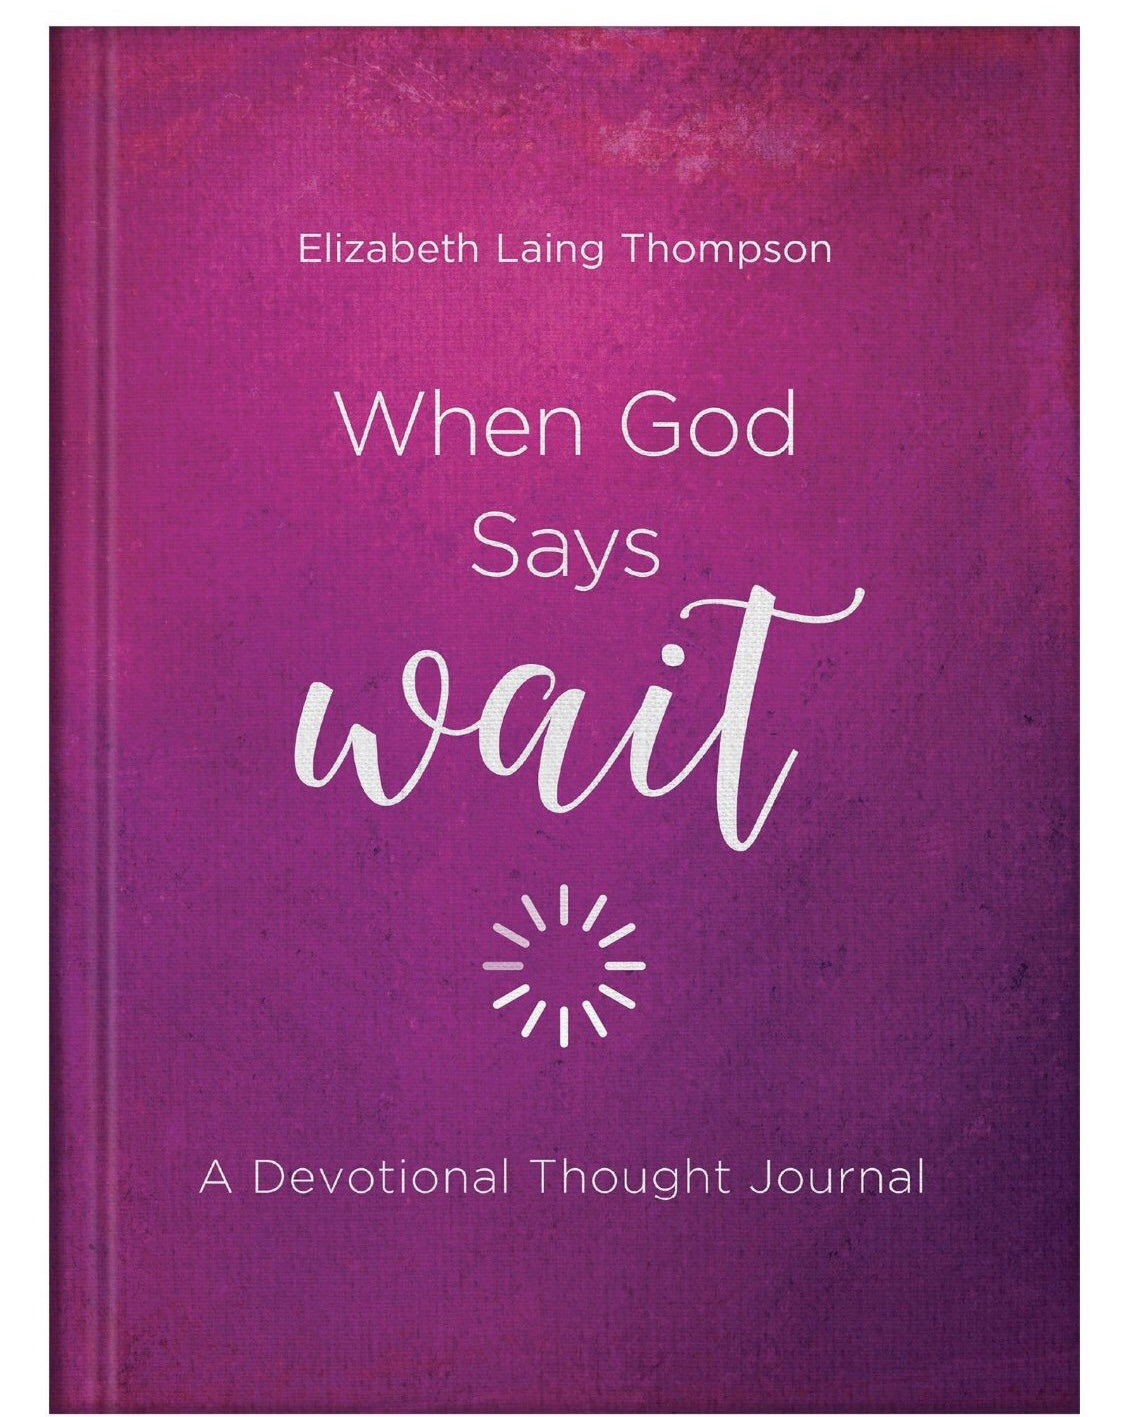 When God Says Wait - A Devotional Thought Journal